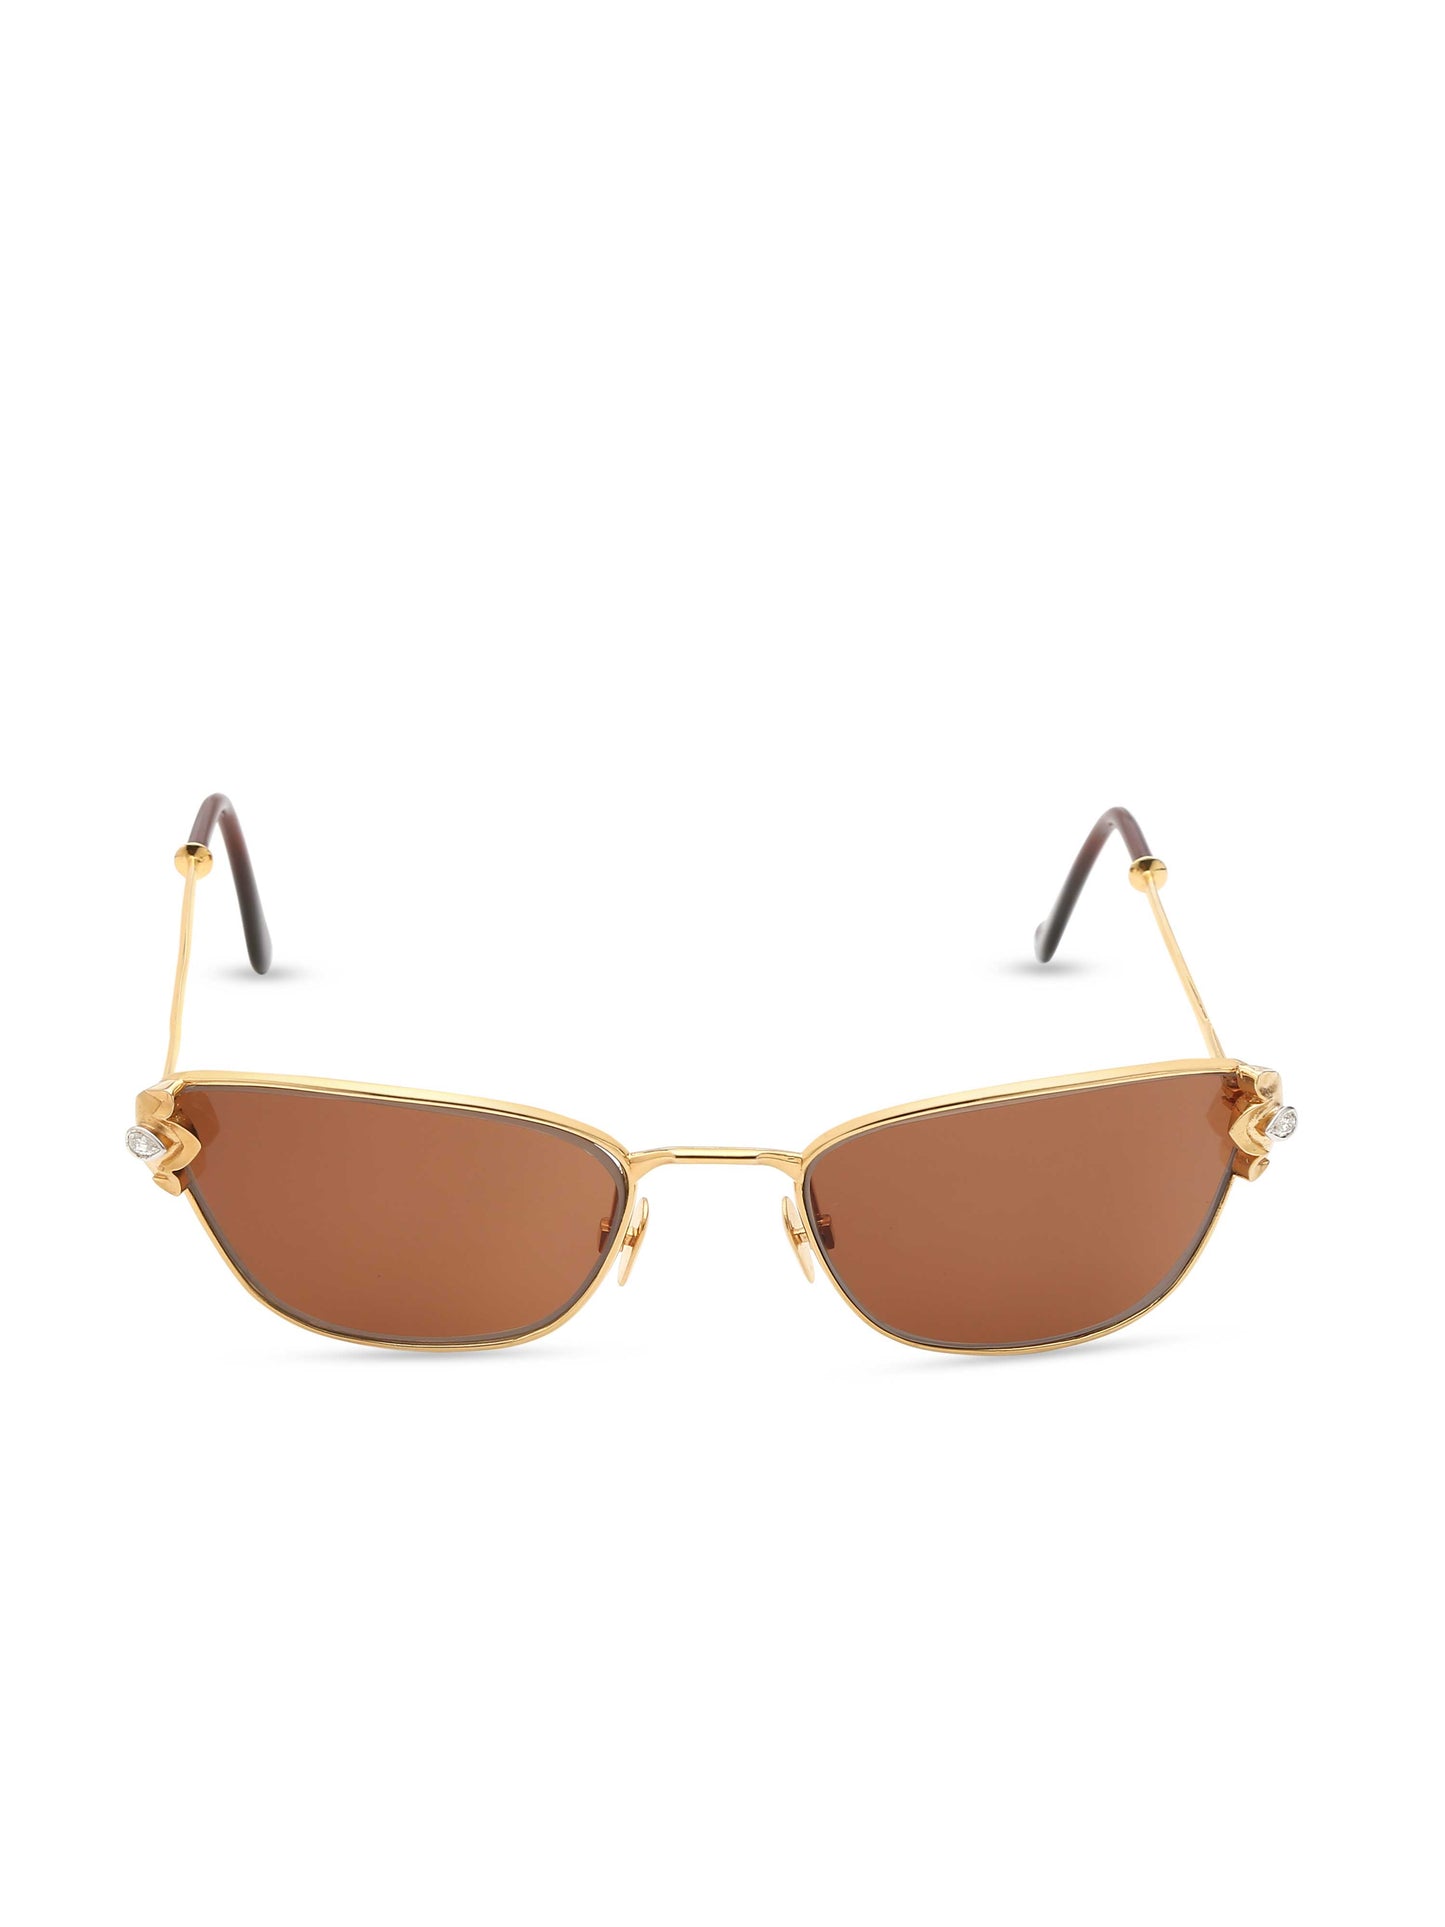 Golden Frosted Tulip Sunglasses